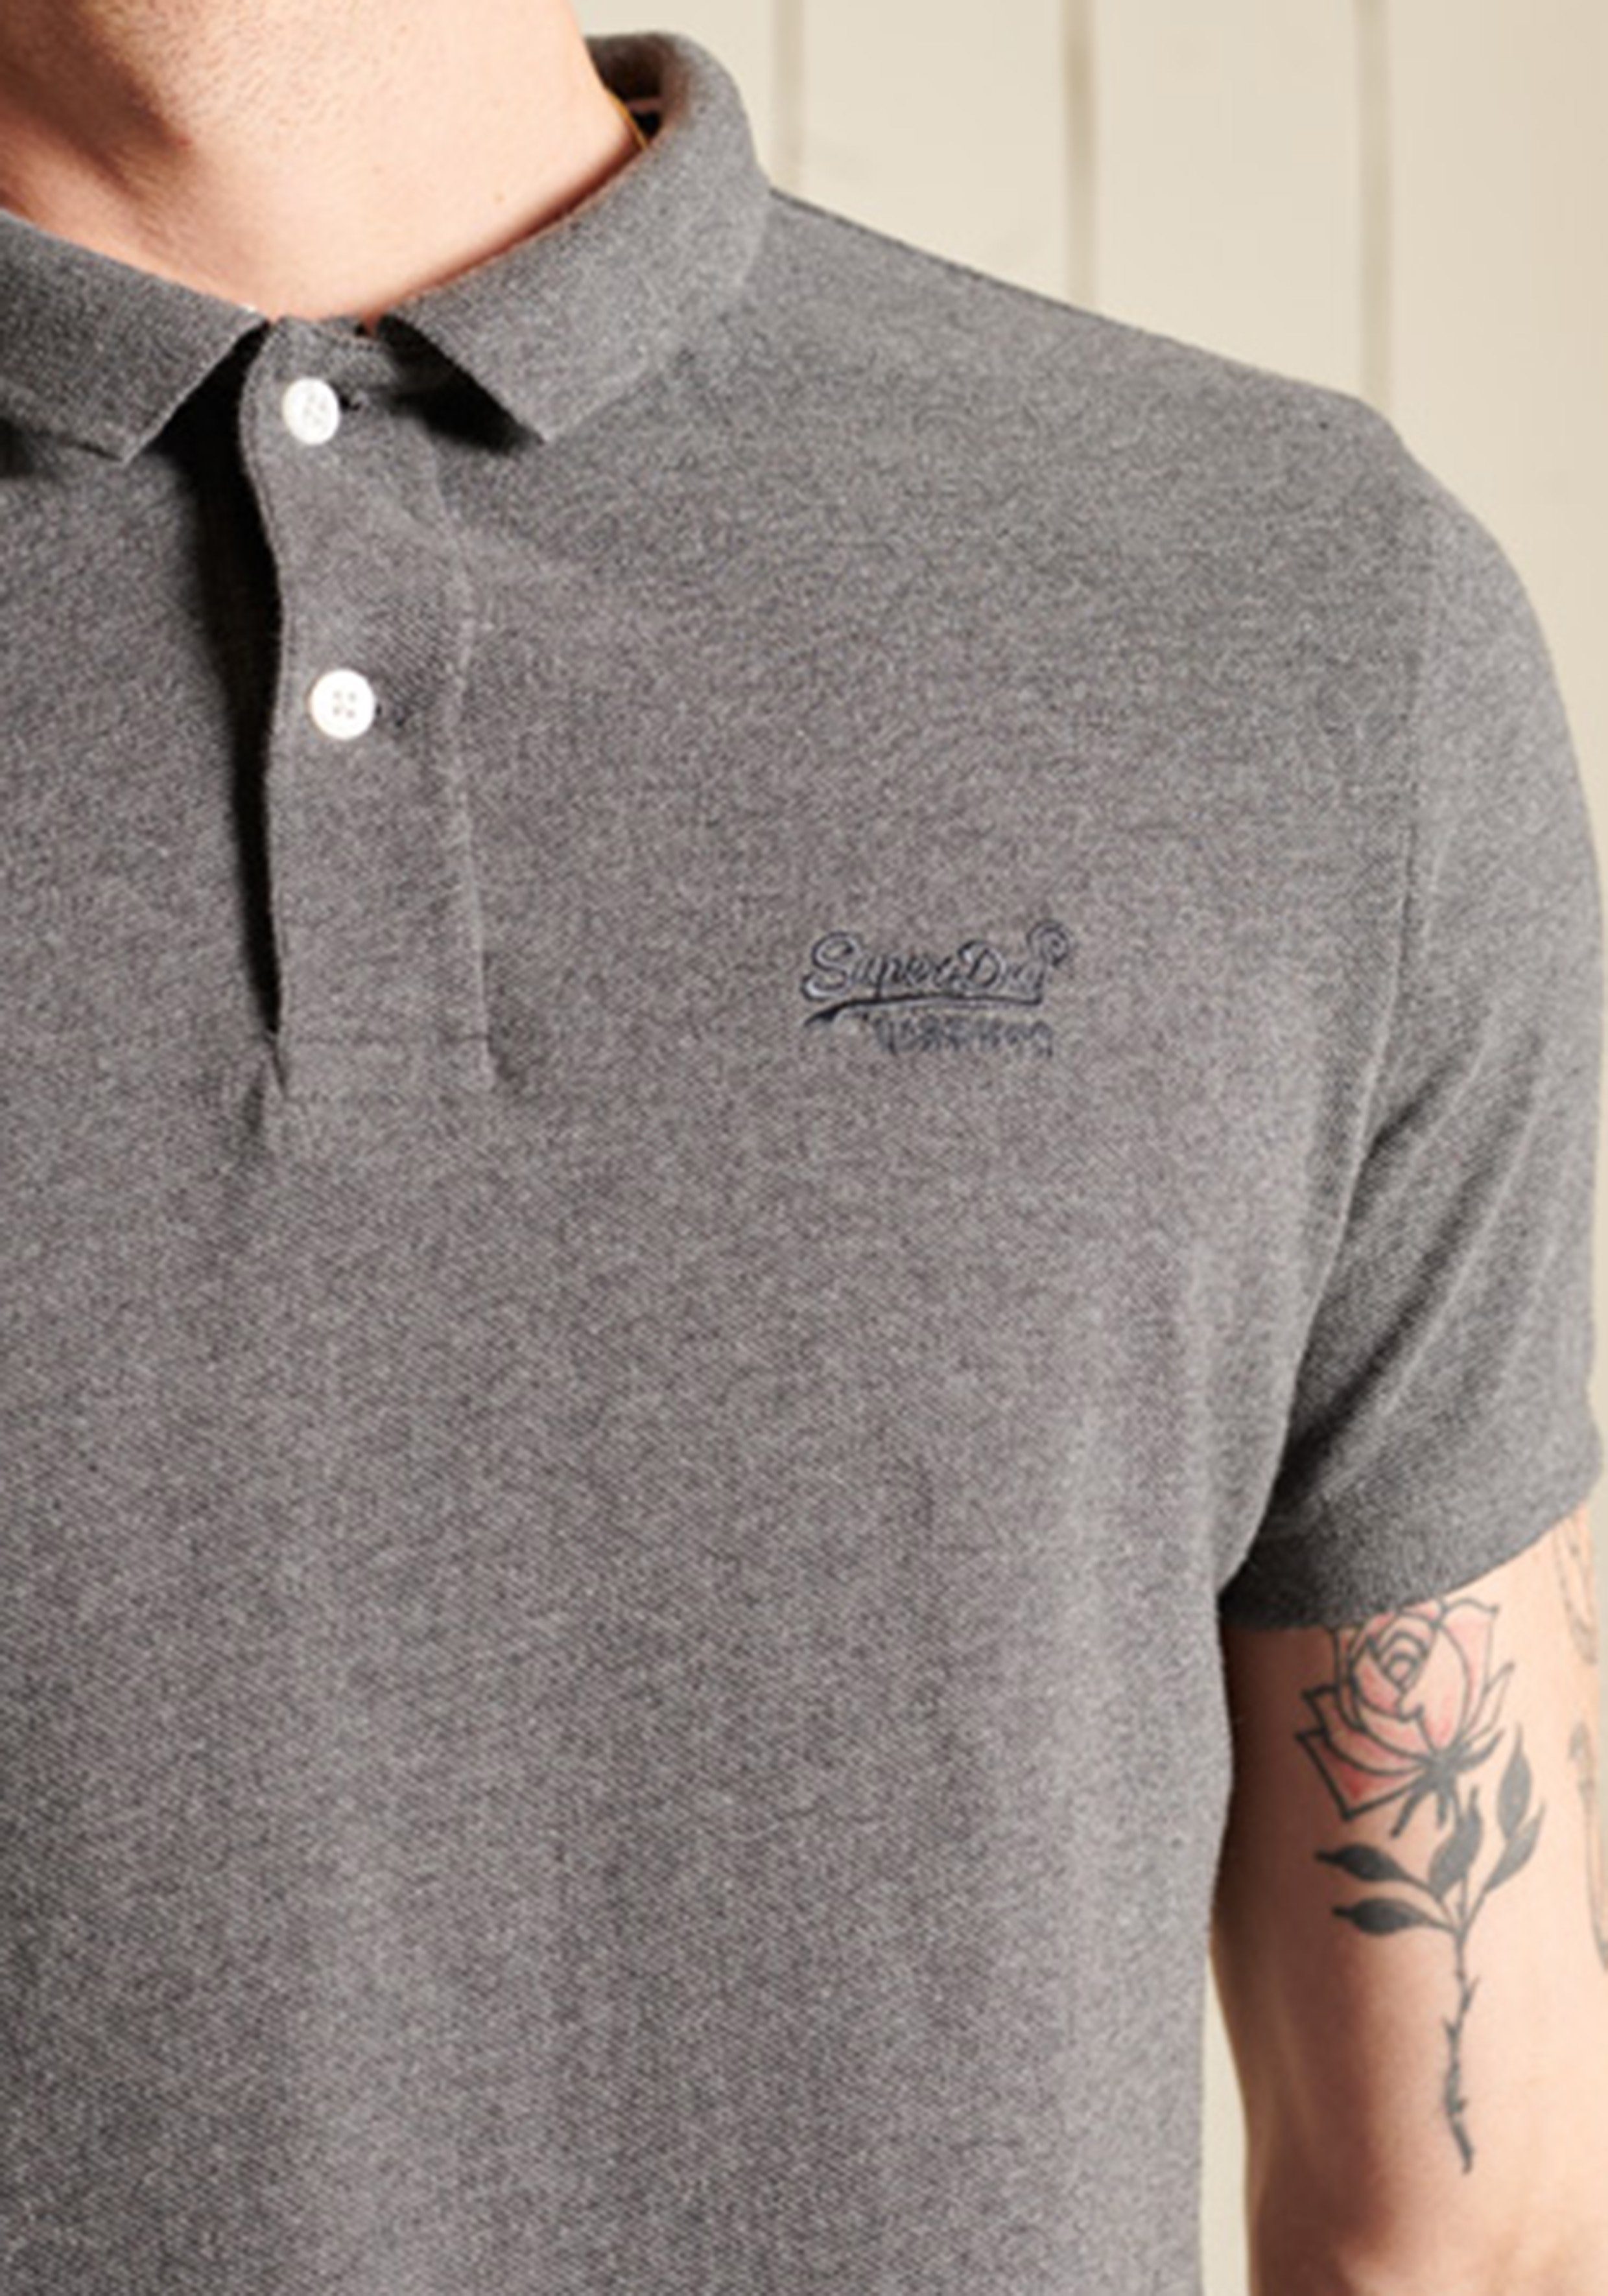 marl rich POLO PIQUE CLASSIC Poloshirt charcoal Superdry